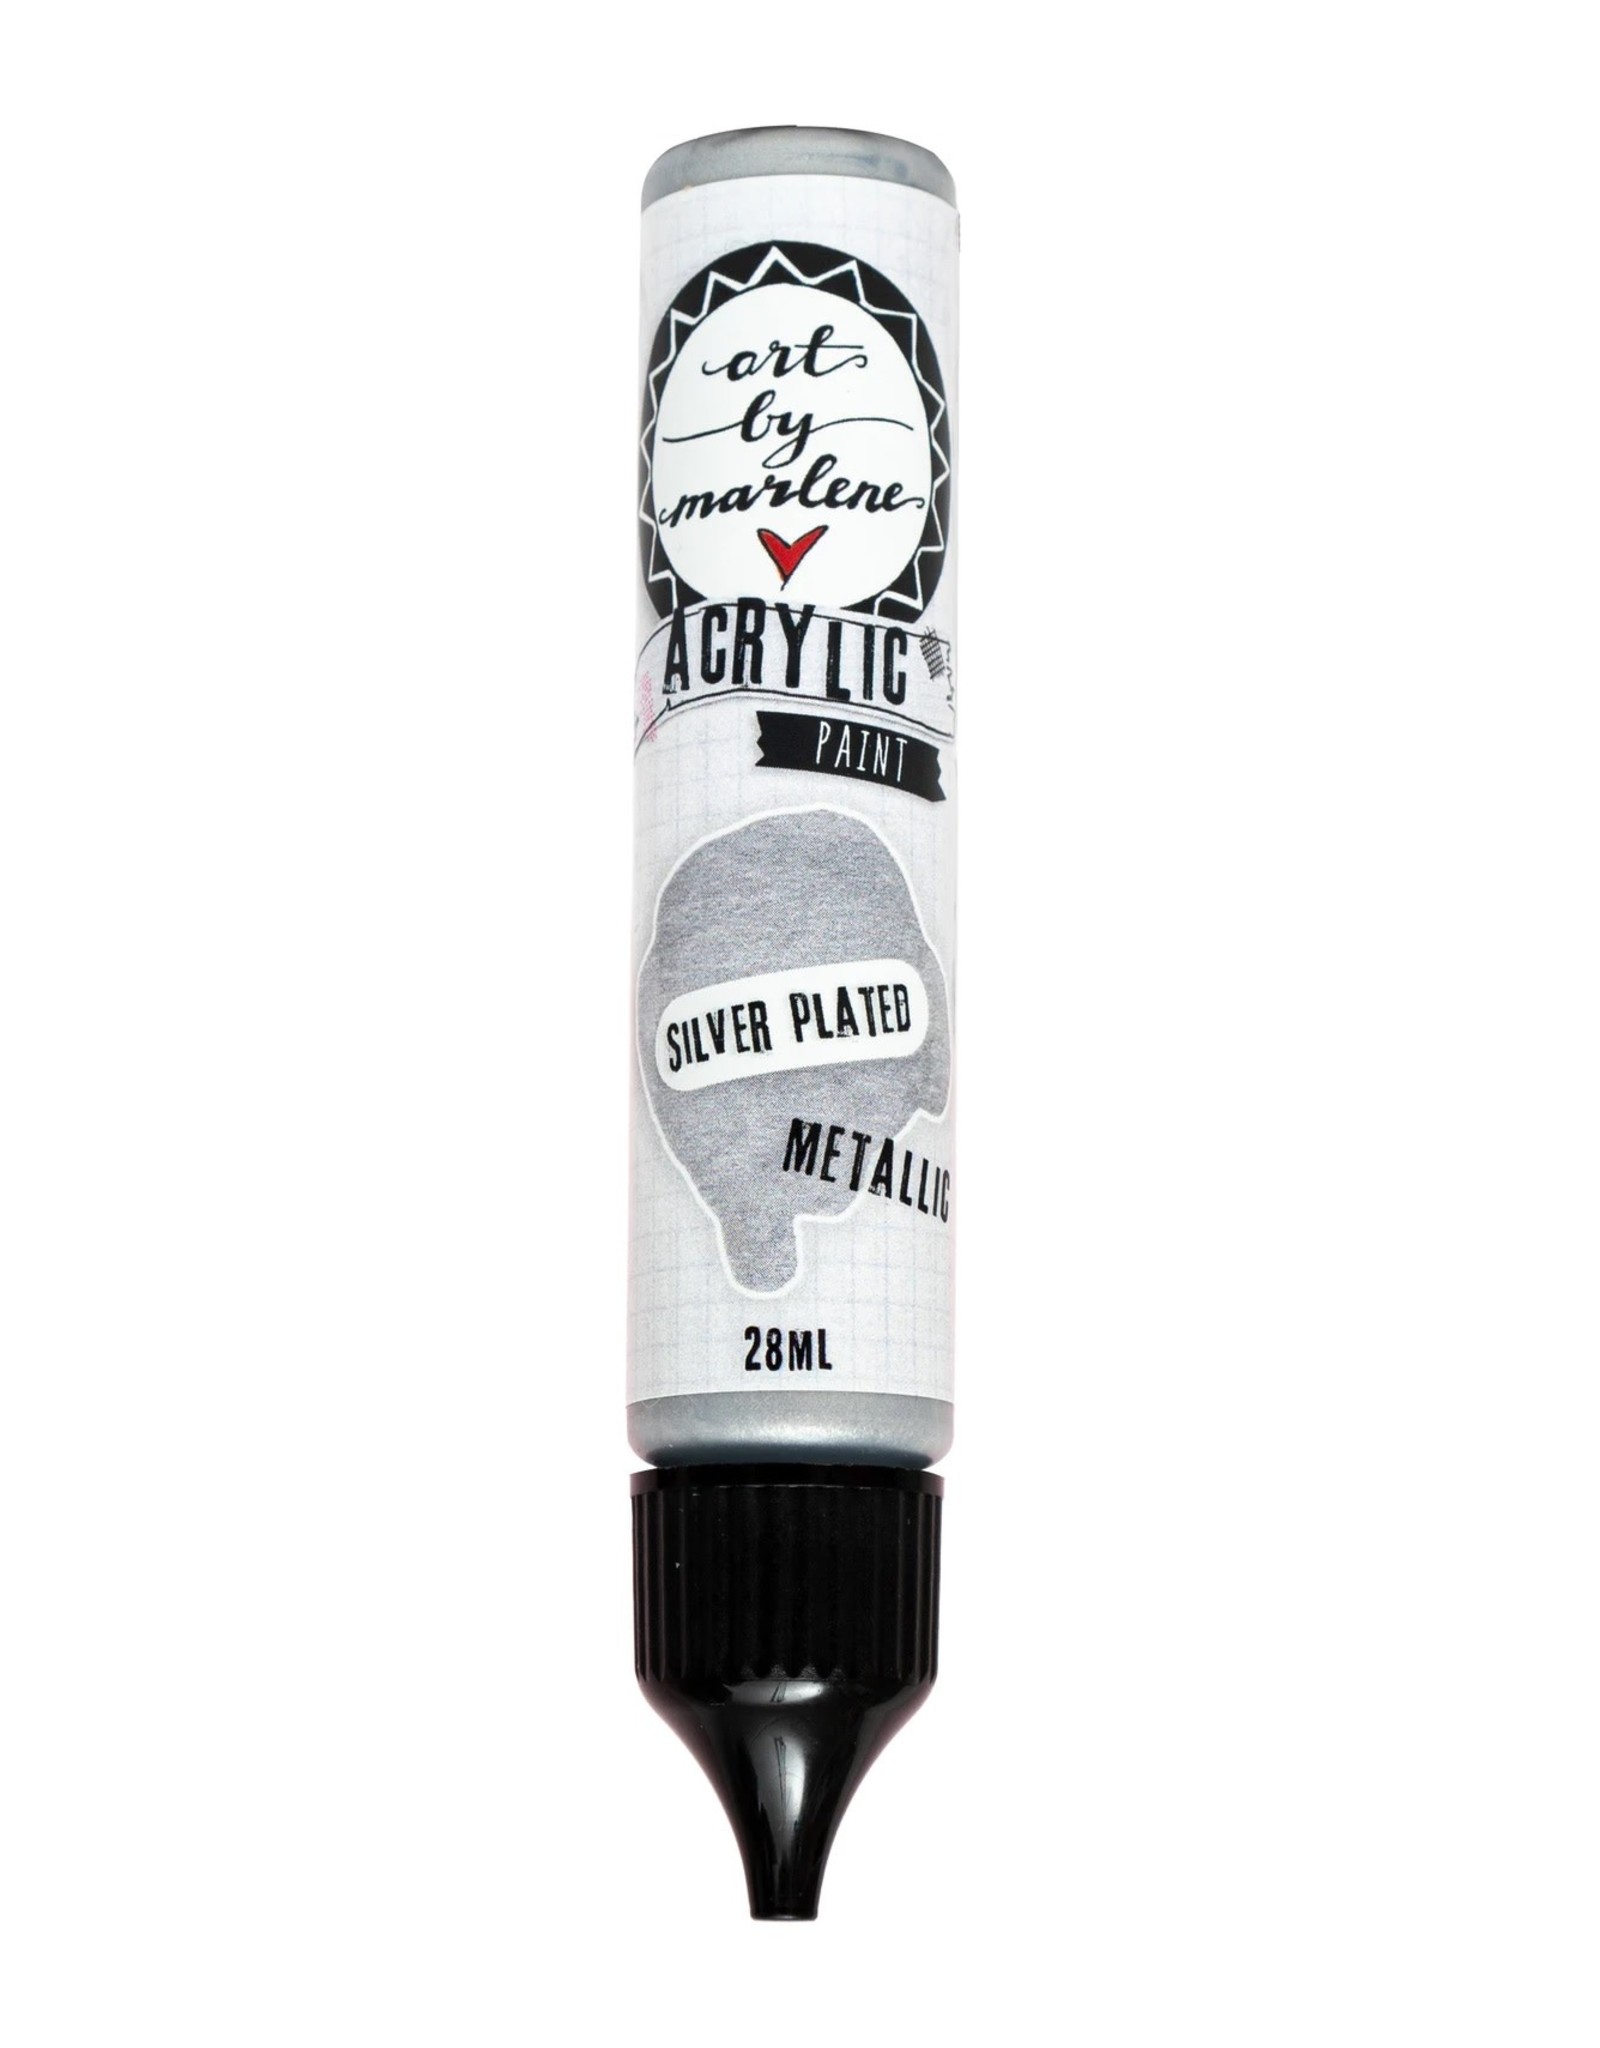 STUDIOLIGHT STUDIOLIGHT ART BY MARLENE ESSENTIALS SPECIAL EFFECT PAINT SILVER PLATED GLAMOUR GLITTER  ACRYLIC PAINT